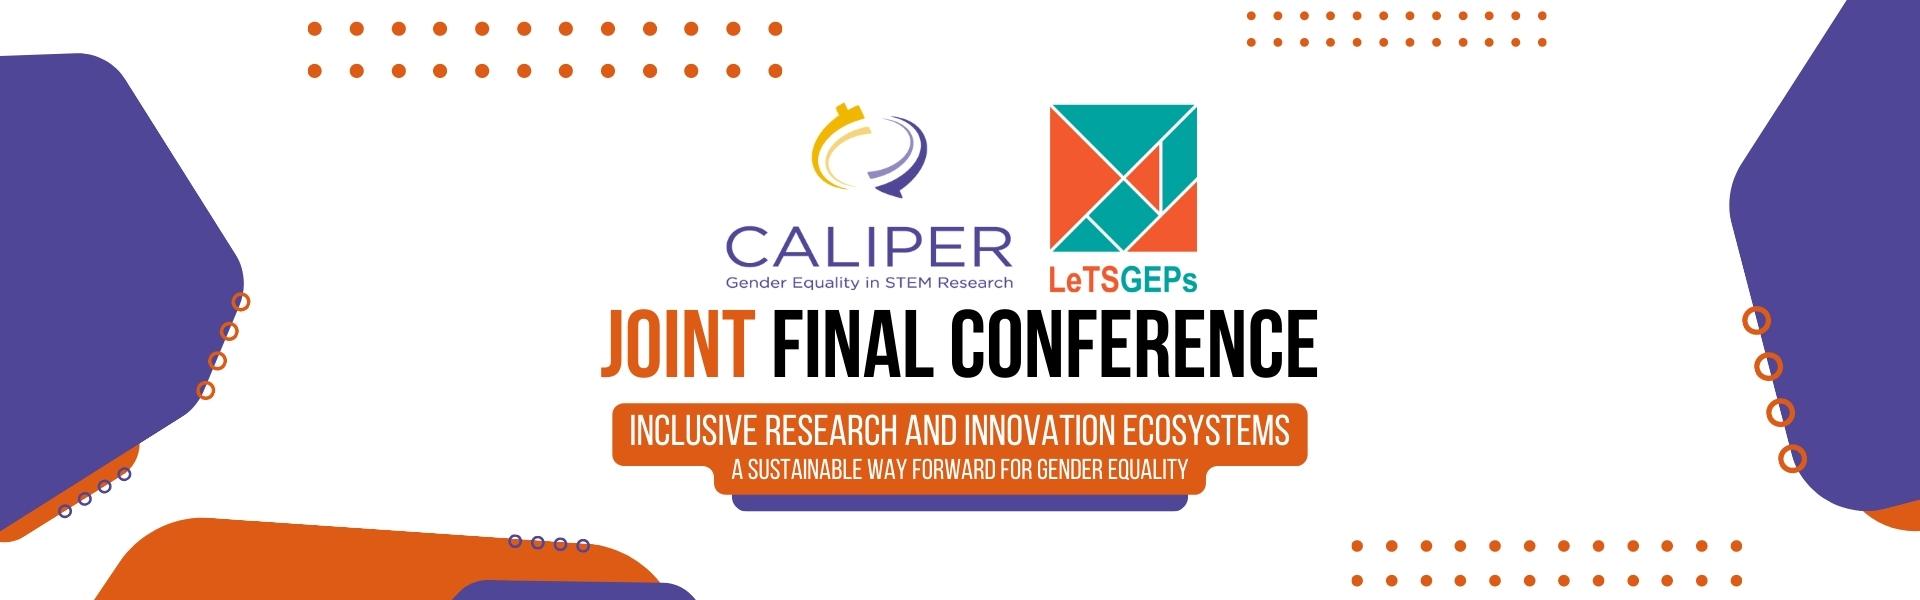 caliper-letsgeps-final-conf-banner-img-new